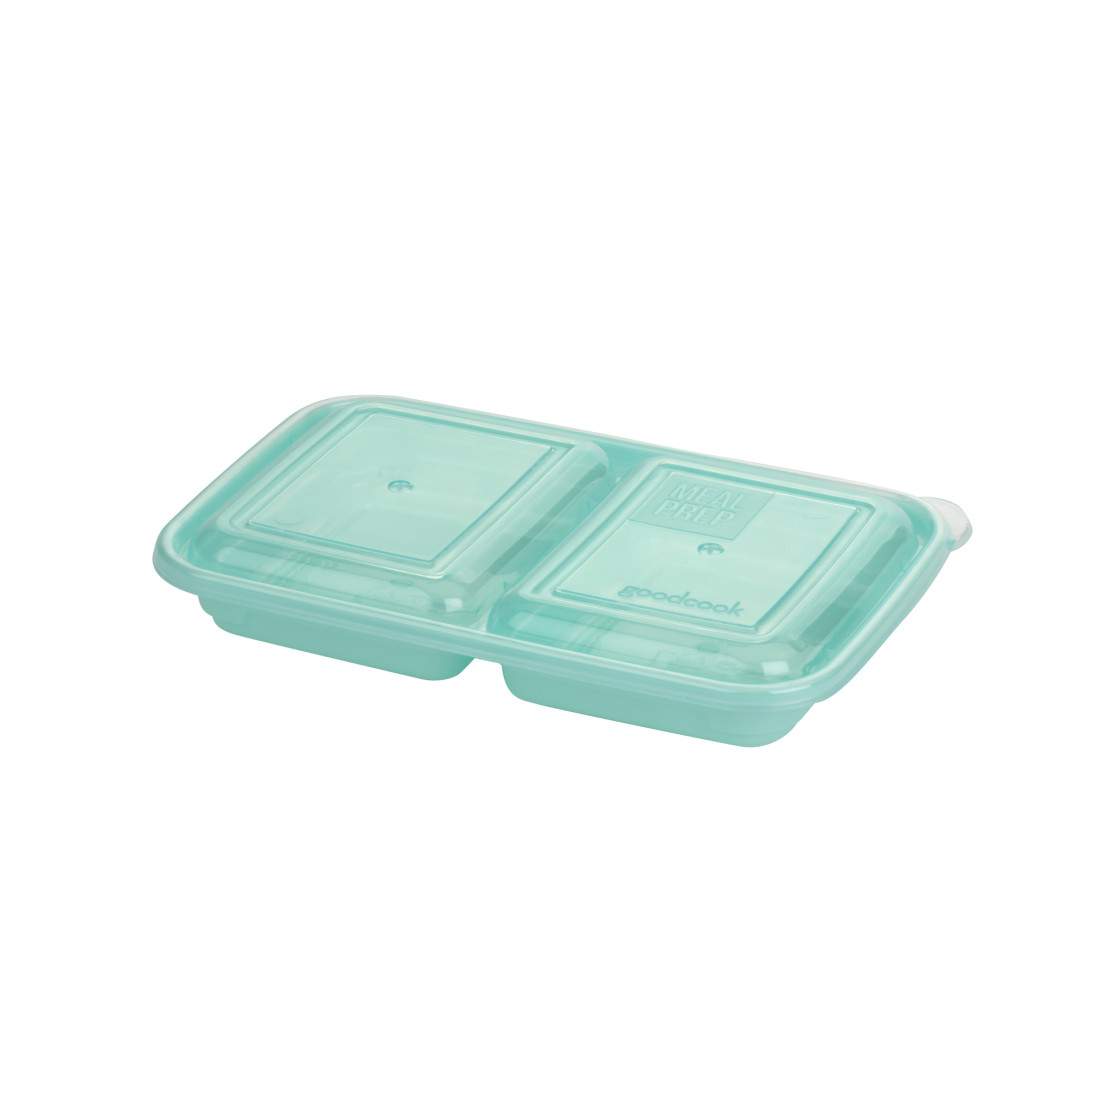 Tupperware stack cooker - household items - by owner - housewares